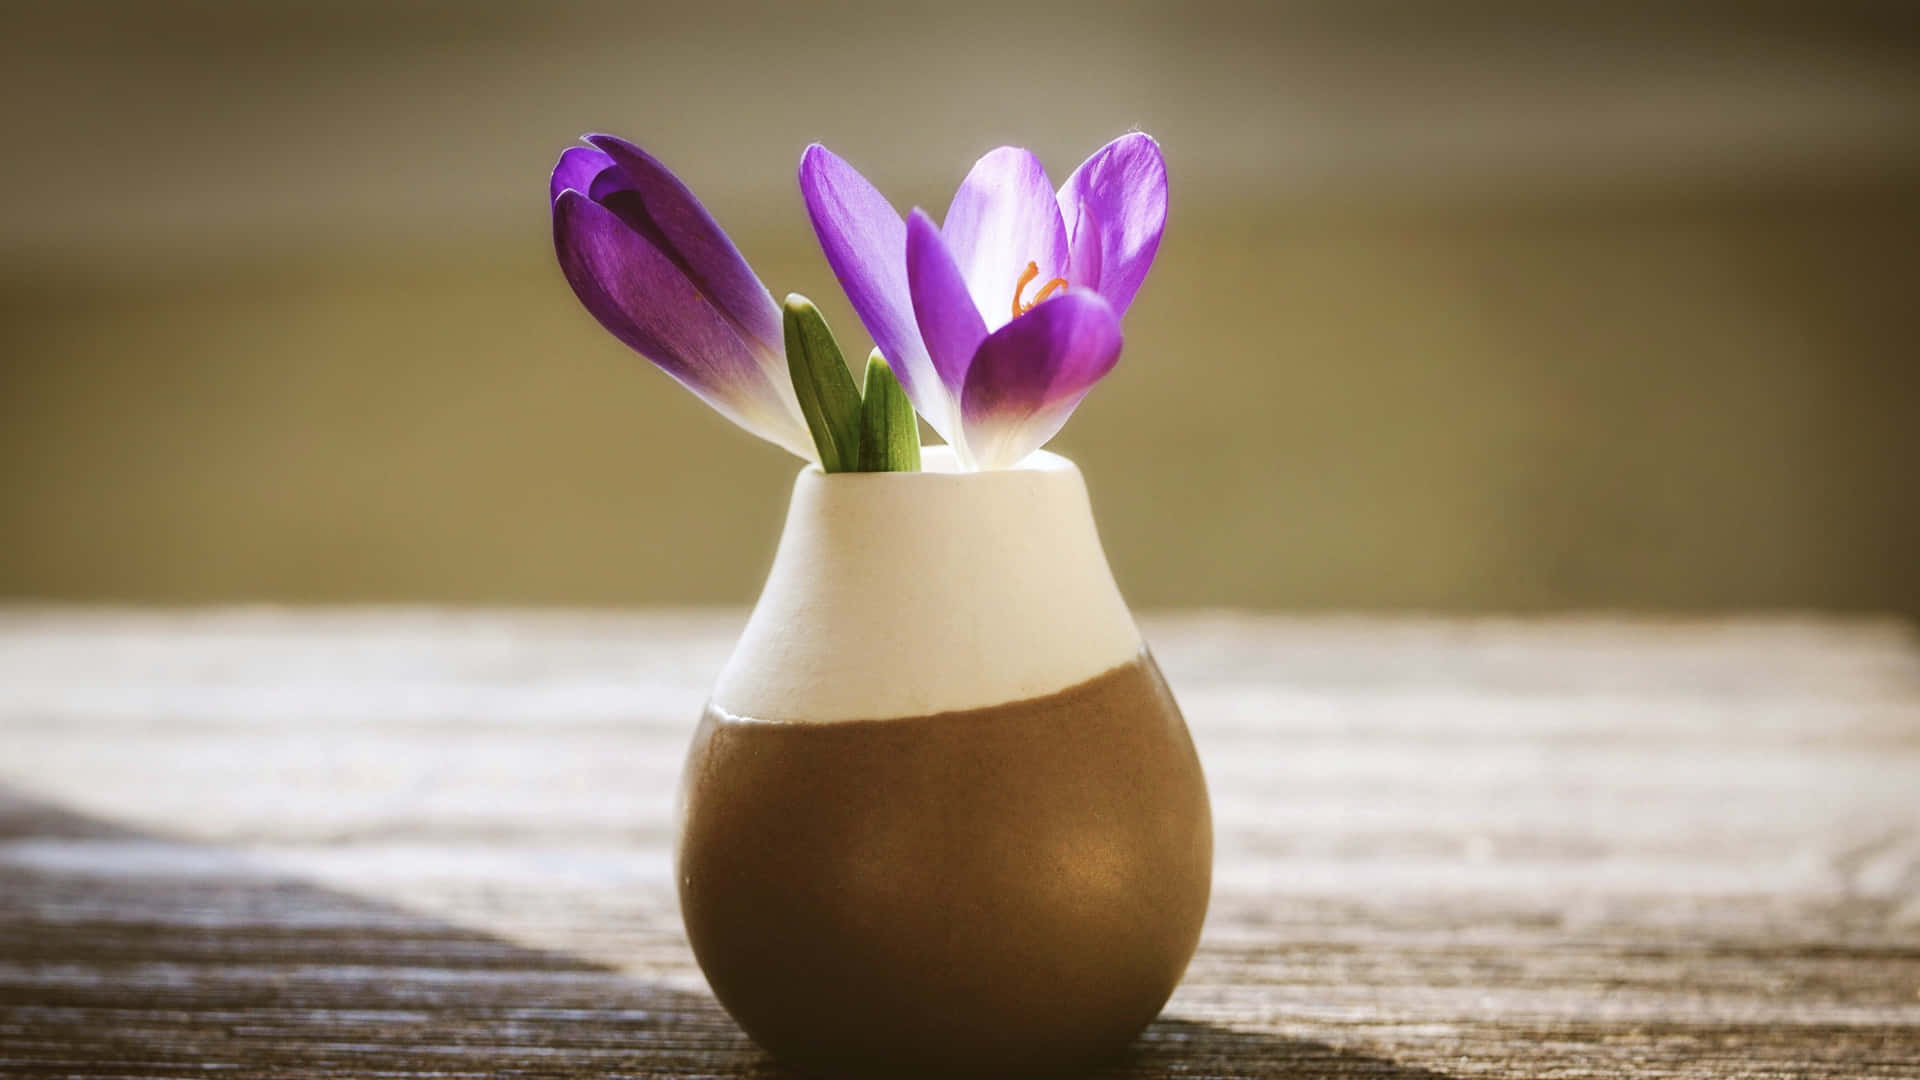 A Brown Vase With Purple Flowers In It